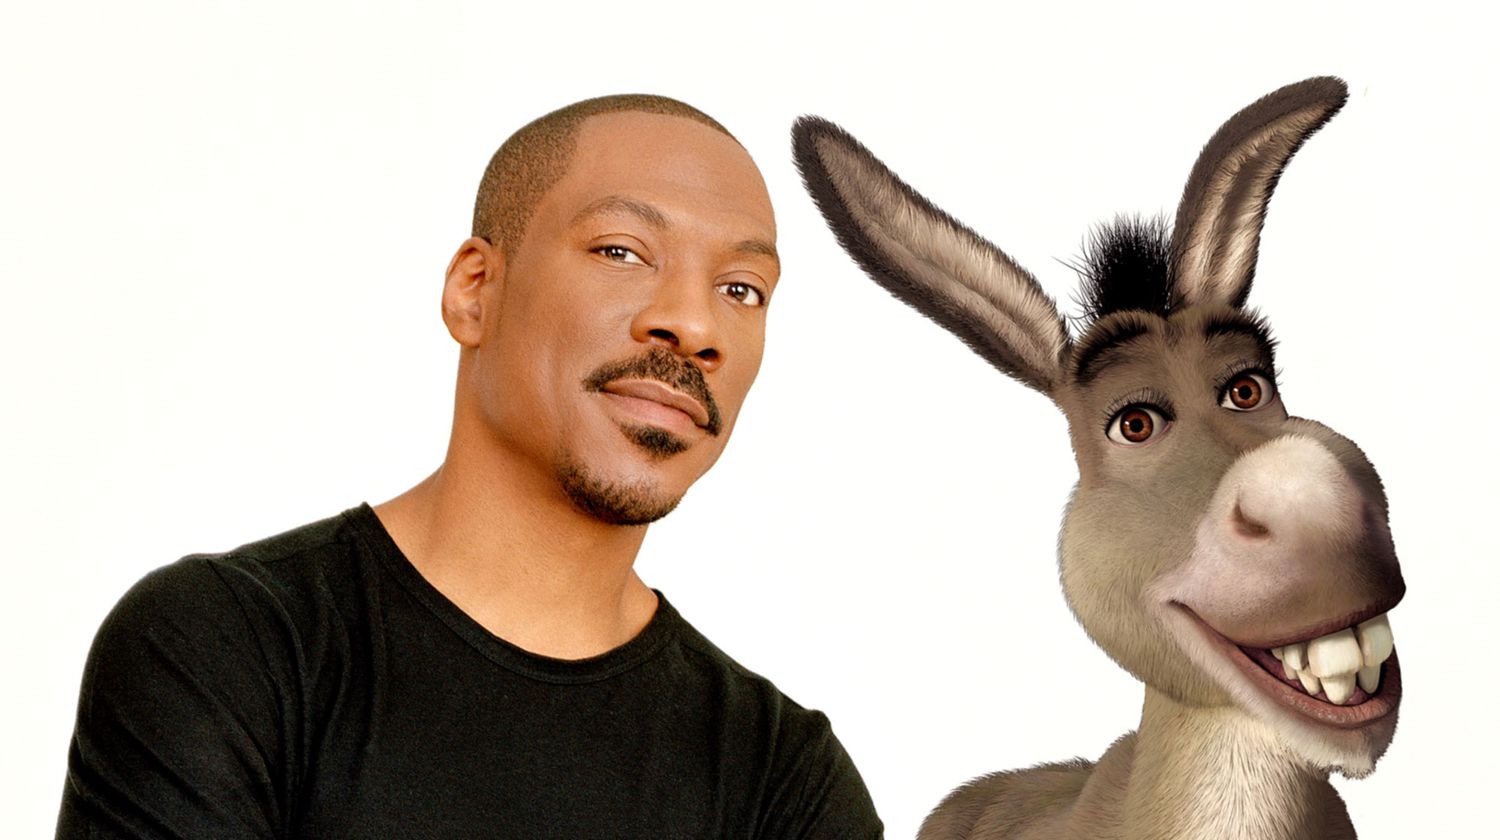 Eddie Murphy is game for 'Shrek 5': 'I'd do it in 2 seconds' - Entertainment Weekly News